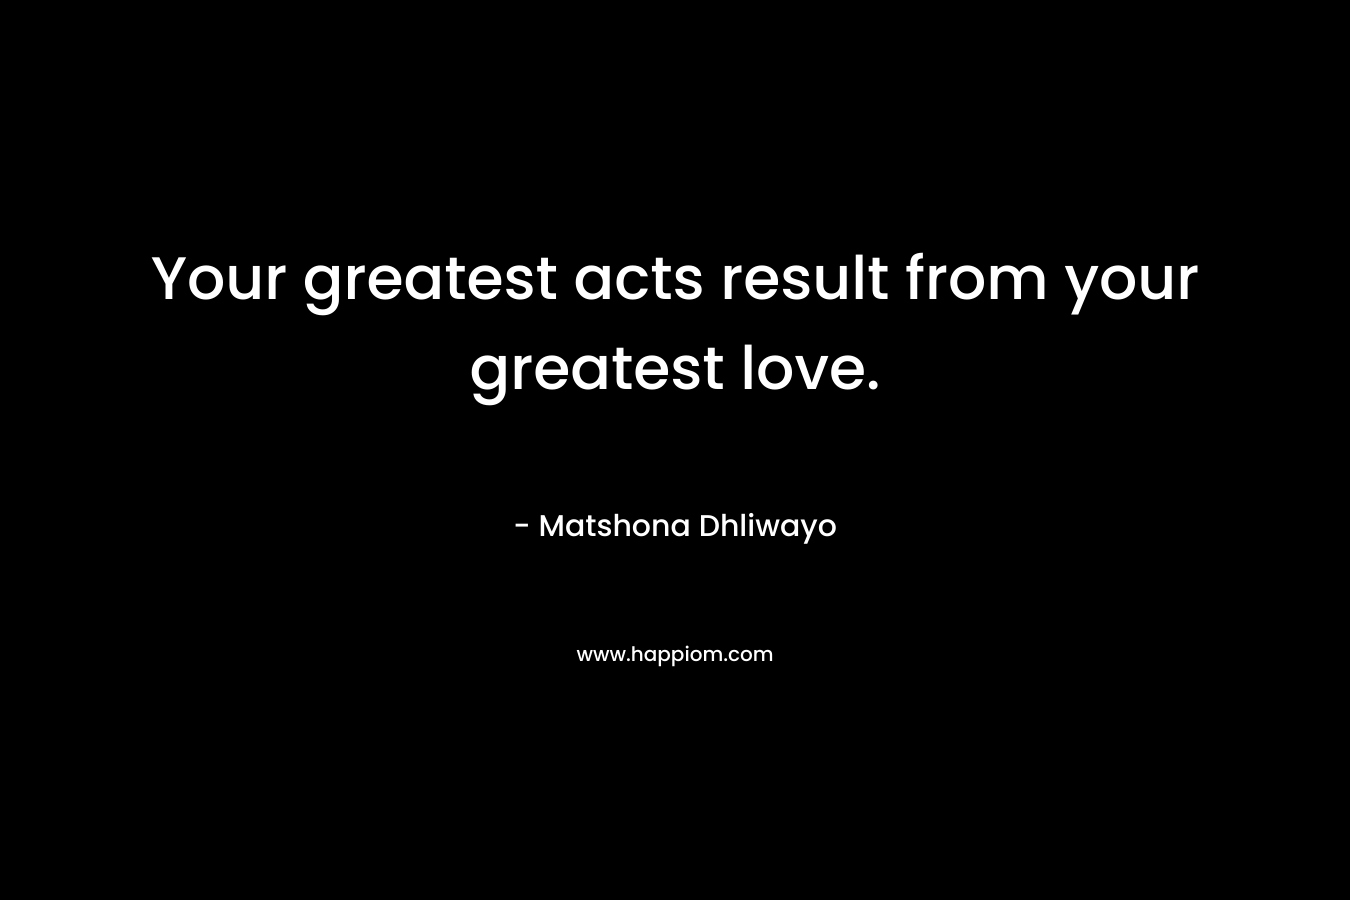 Your greatest acts result from your greatest love.